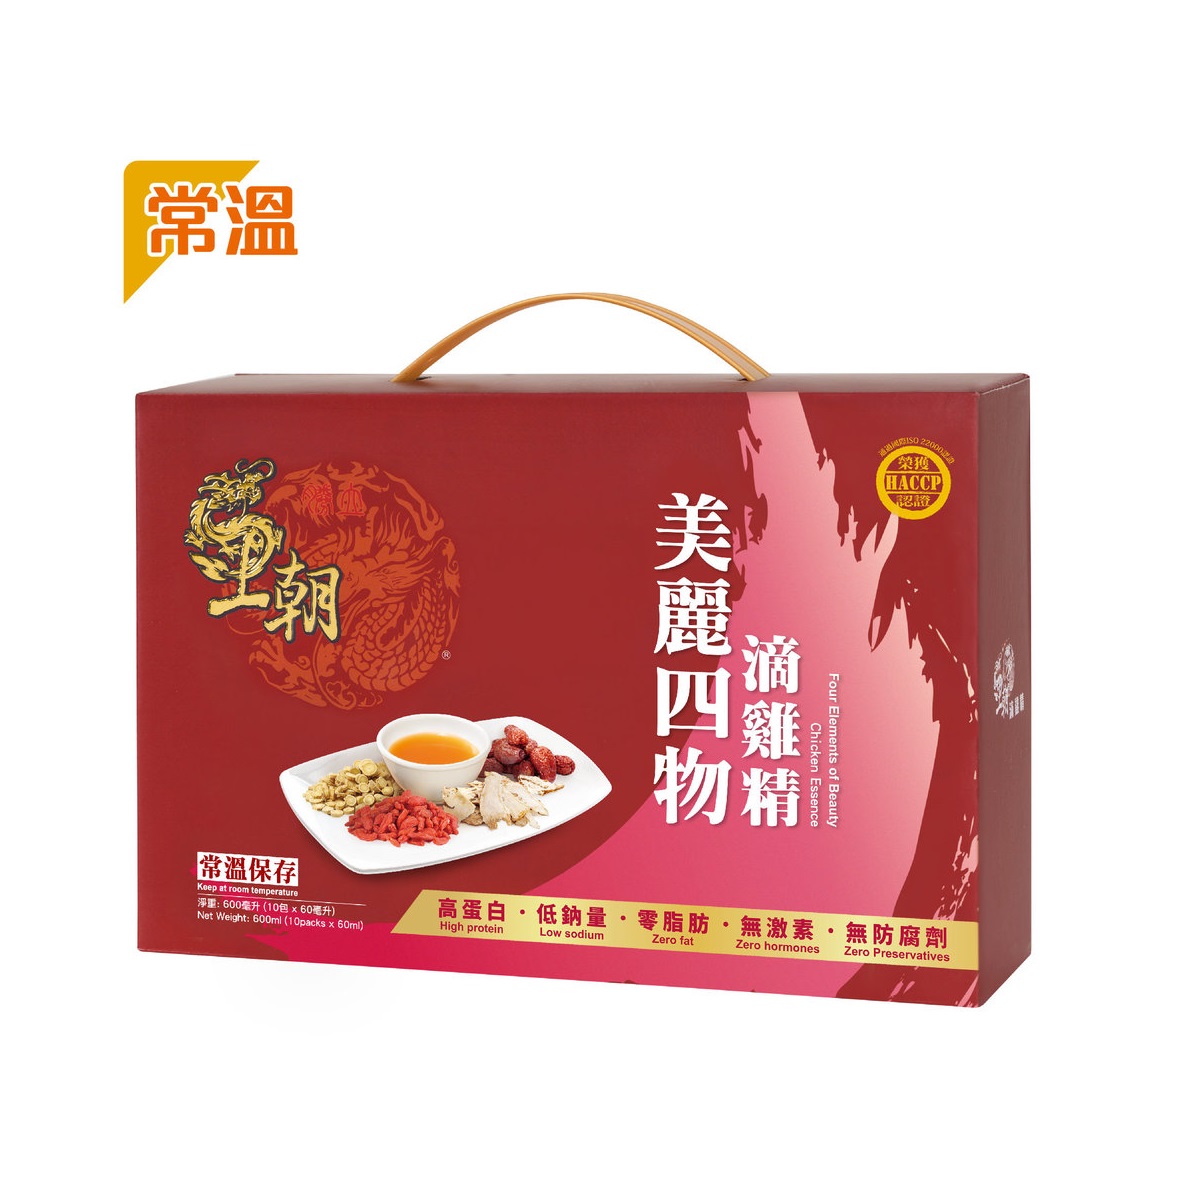 Wang Chao Chicken Essence (Four Element of Beauty Flavor) (Ambient - 10 Packs) +  (Cordyceps Mycelium Flavor) (Ambient - 10 Packs)